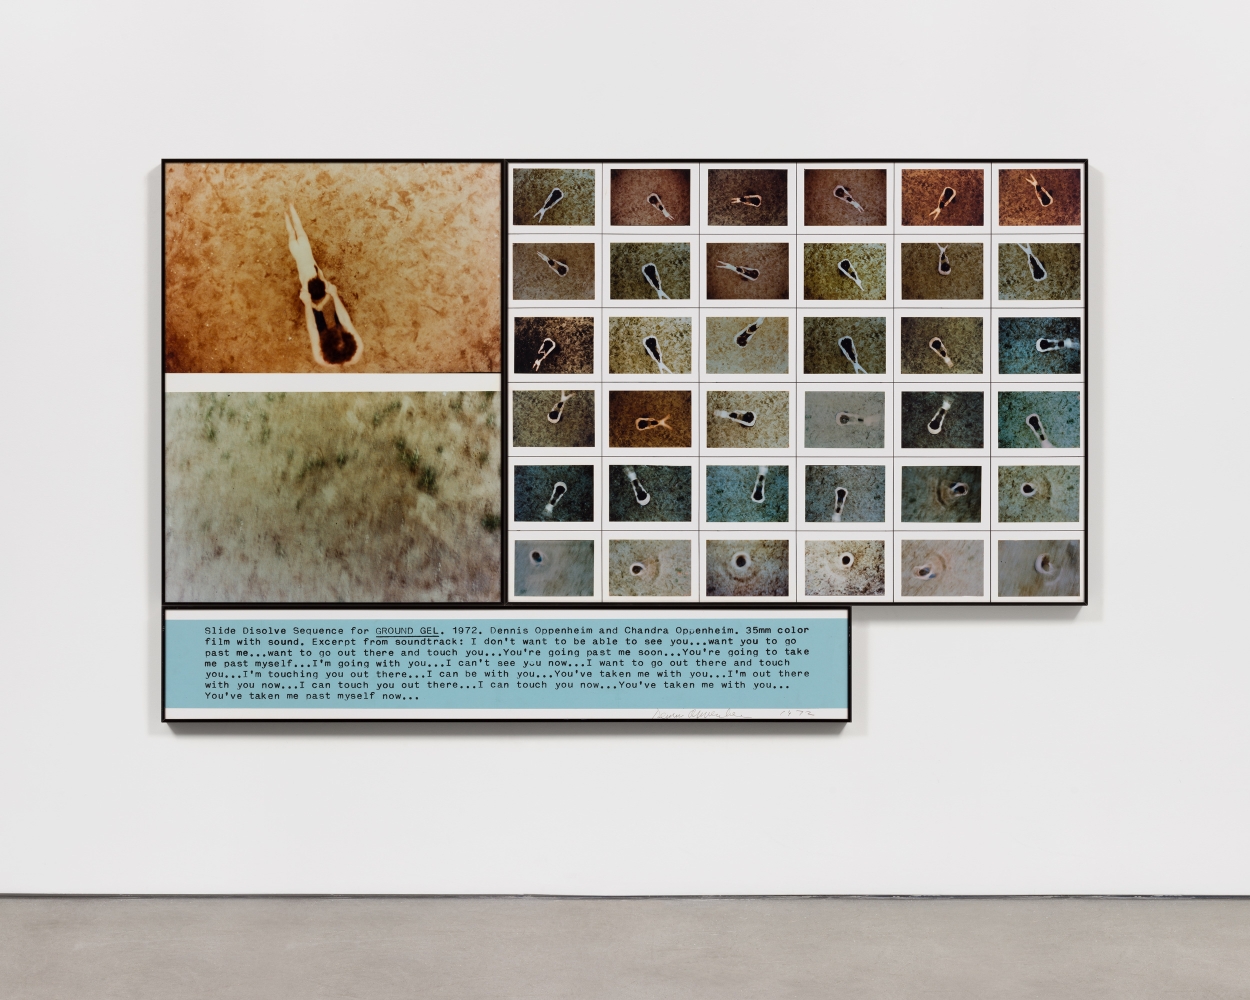 Three paneled piece depicting microscopic slides arranged in a grid with blue text below by Dennis Oppenheim.